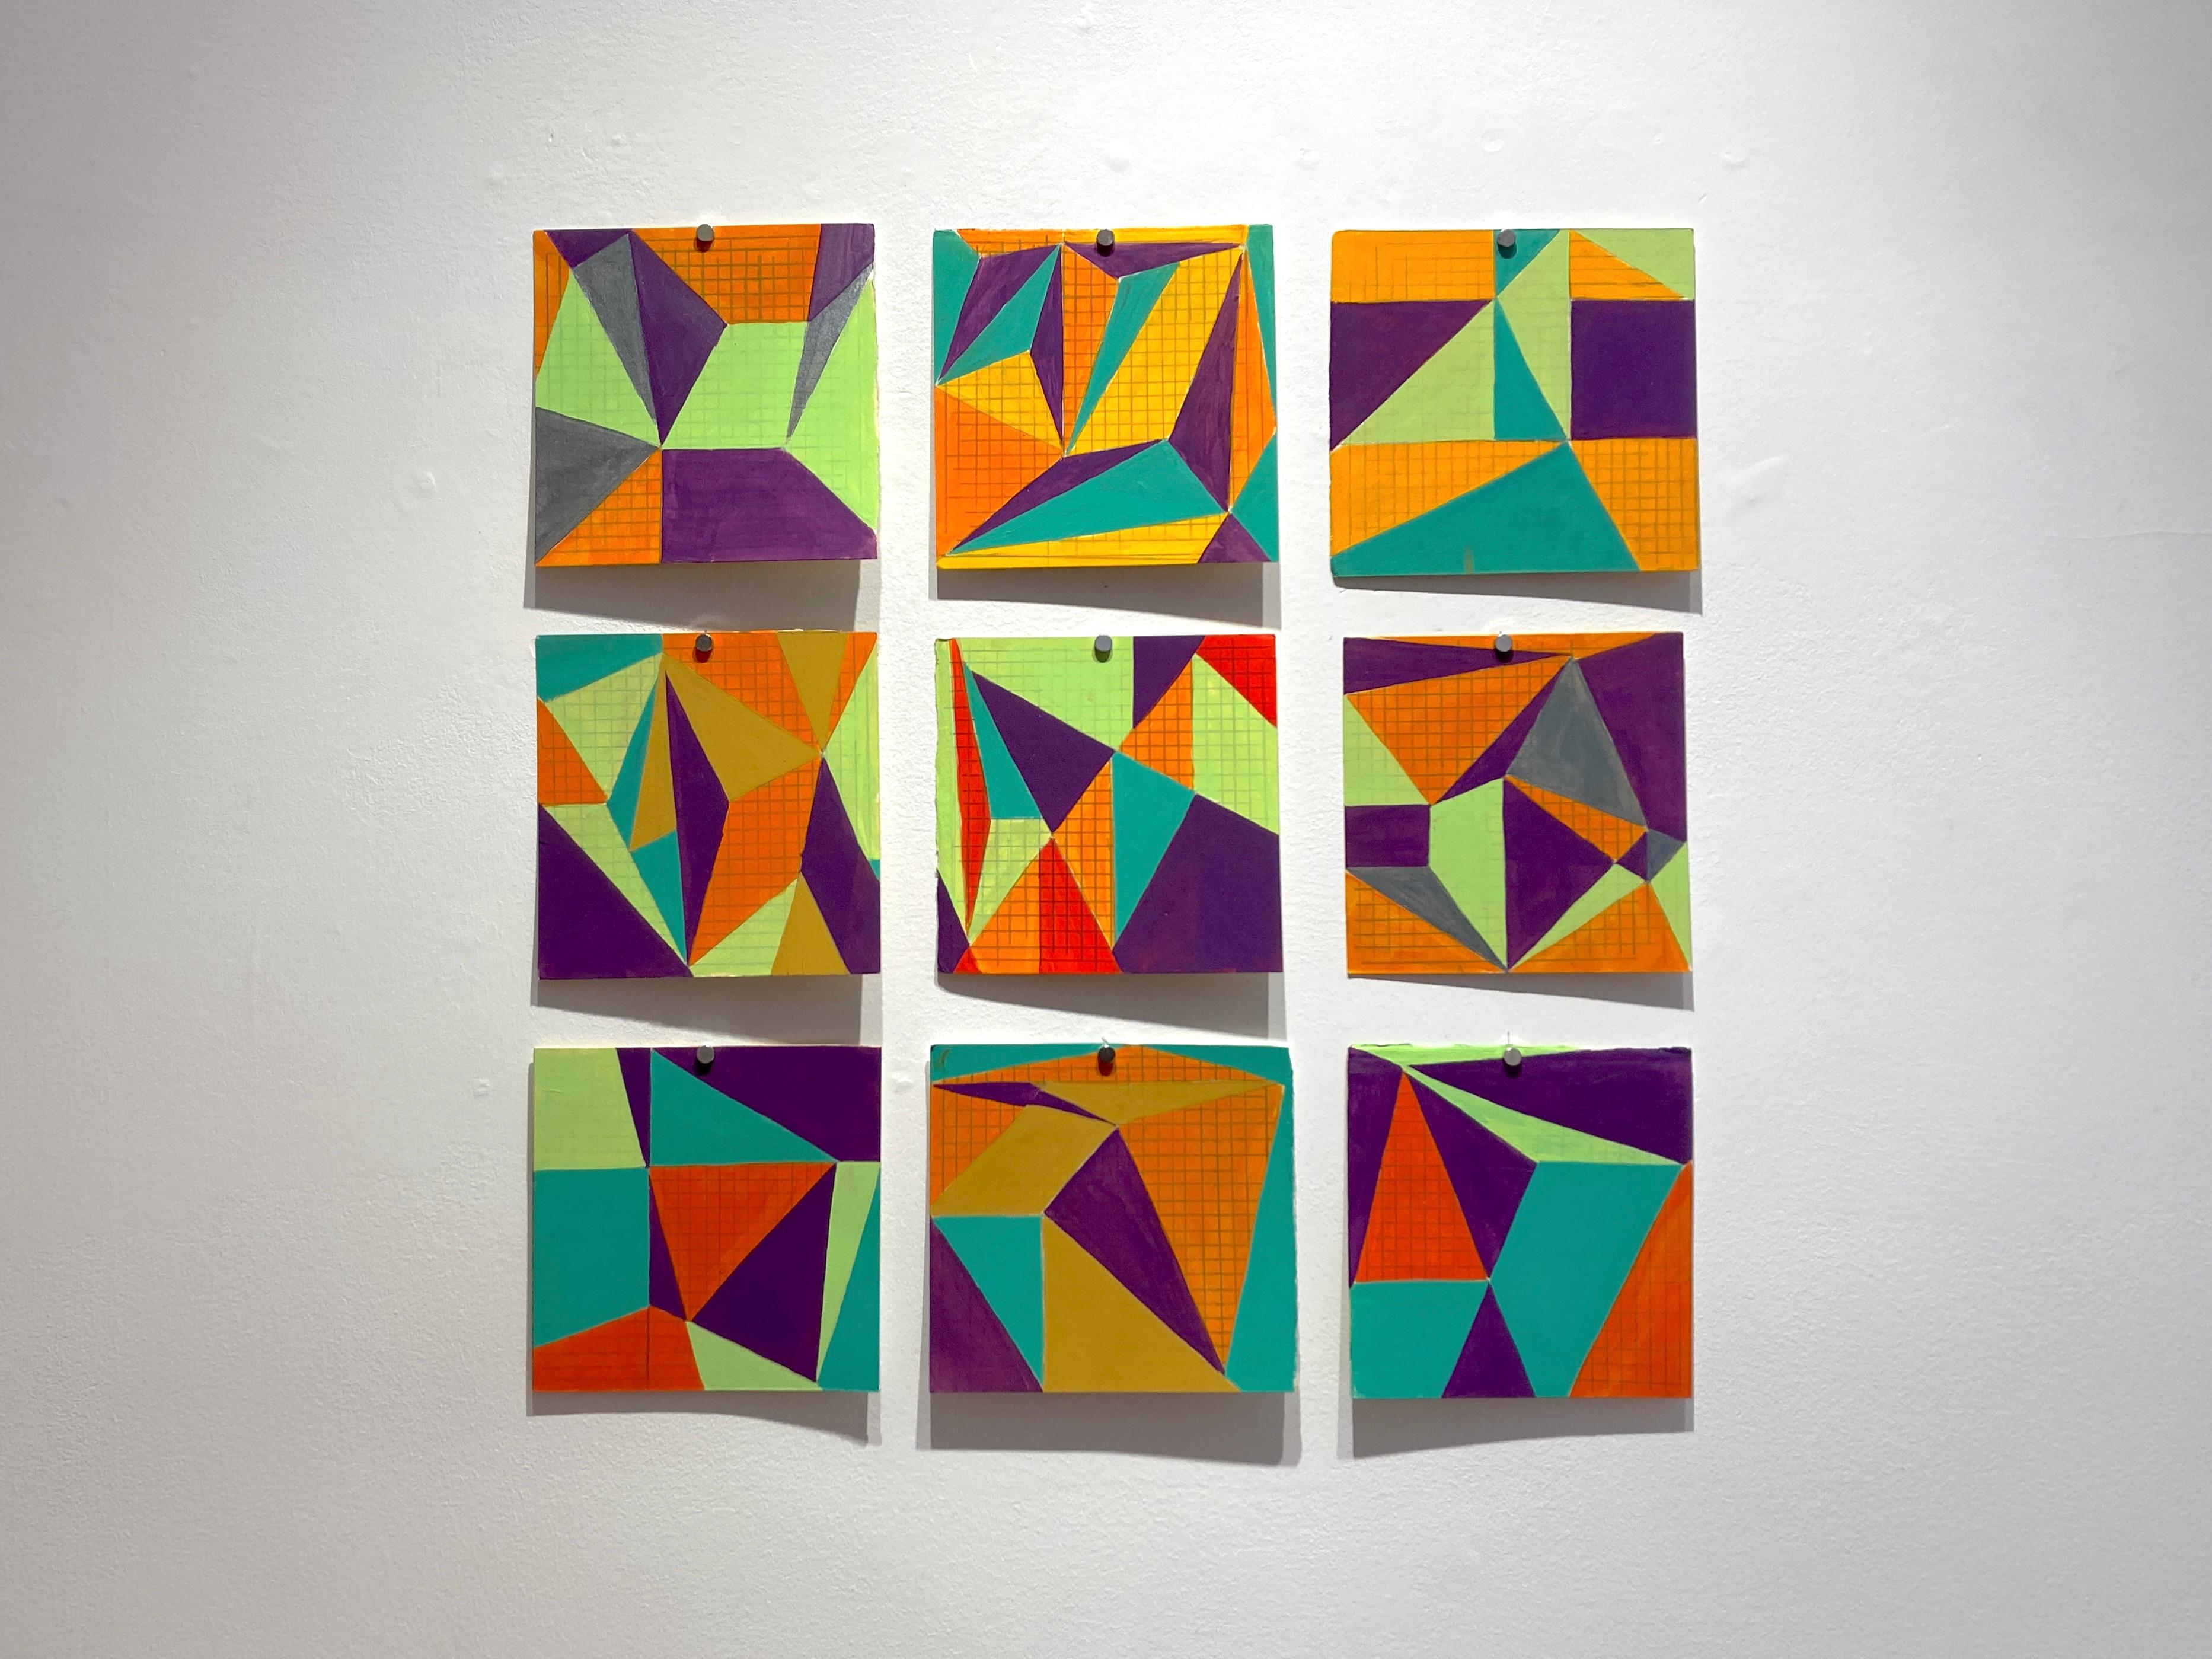 Untitled 4, abstract geometric pattern on paper, green, orange and purple - Abstract Geometric Art by Caryn Azoff